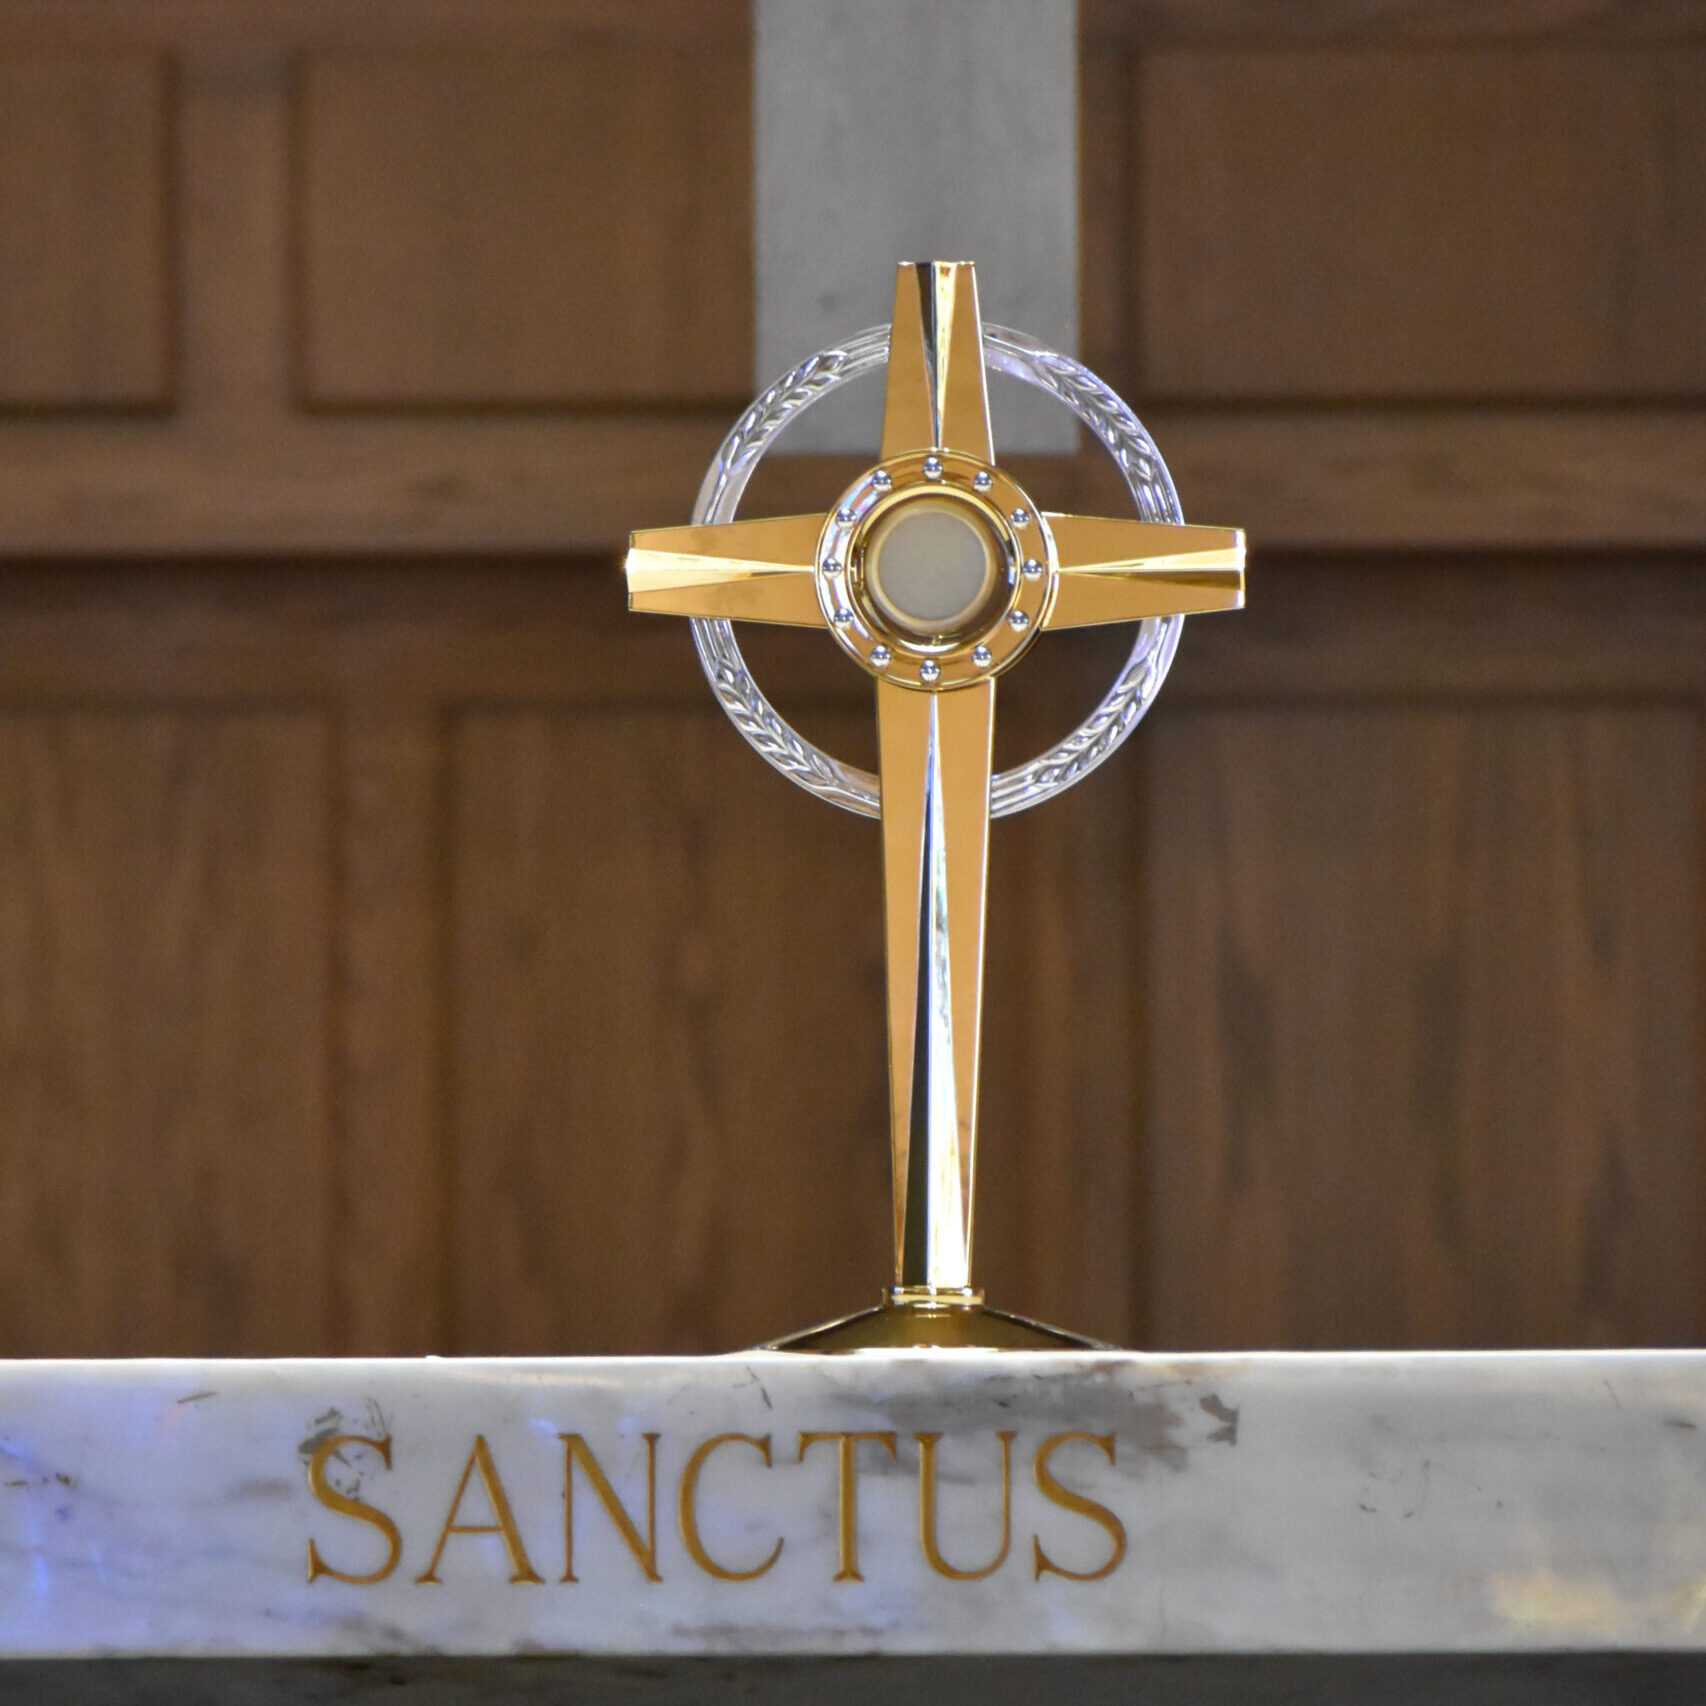 A golden monstrance sits on the altar at St. Christine Parish.